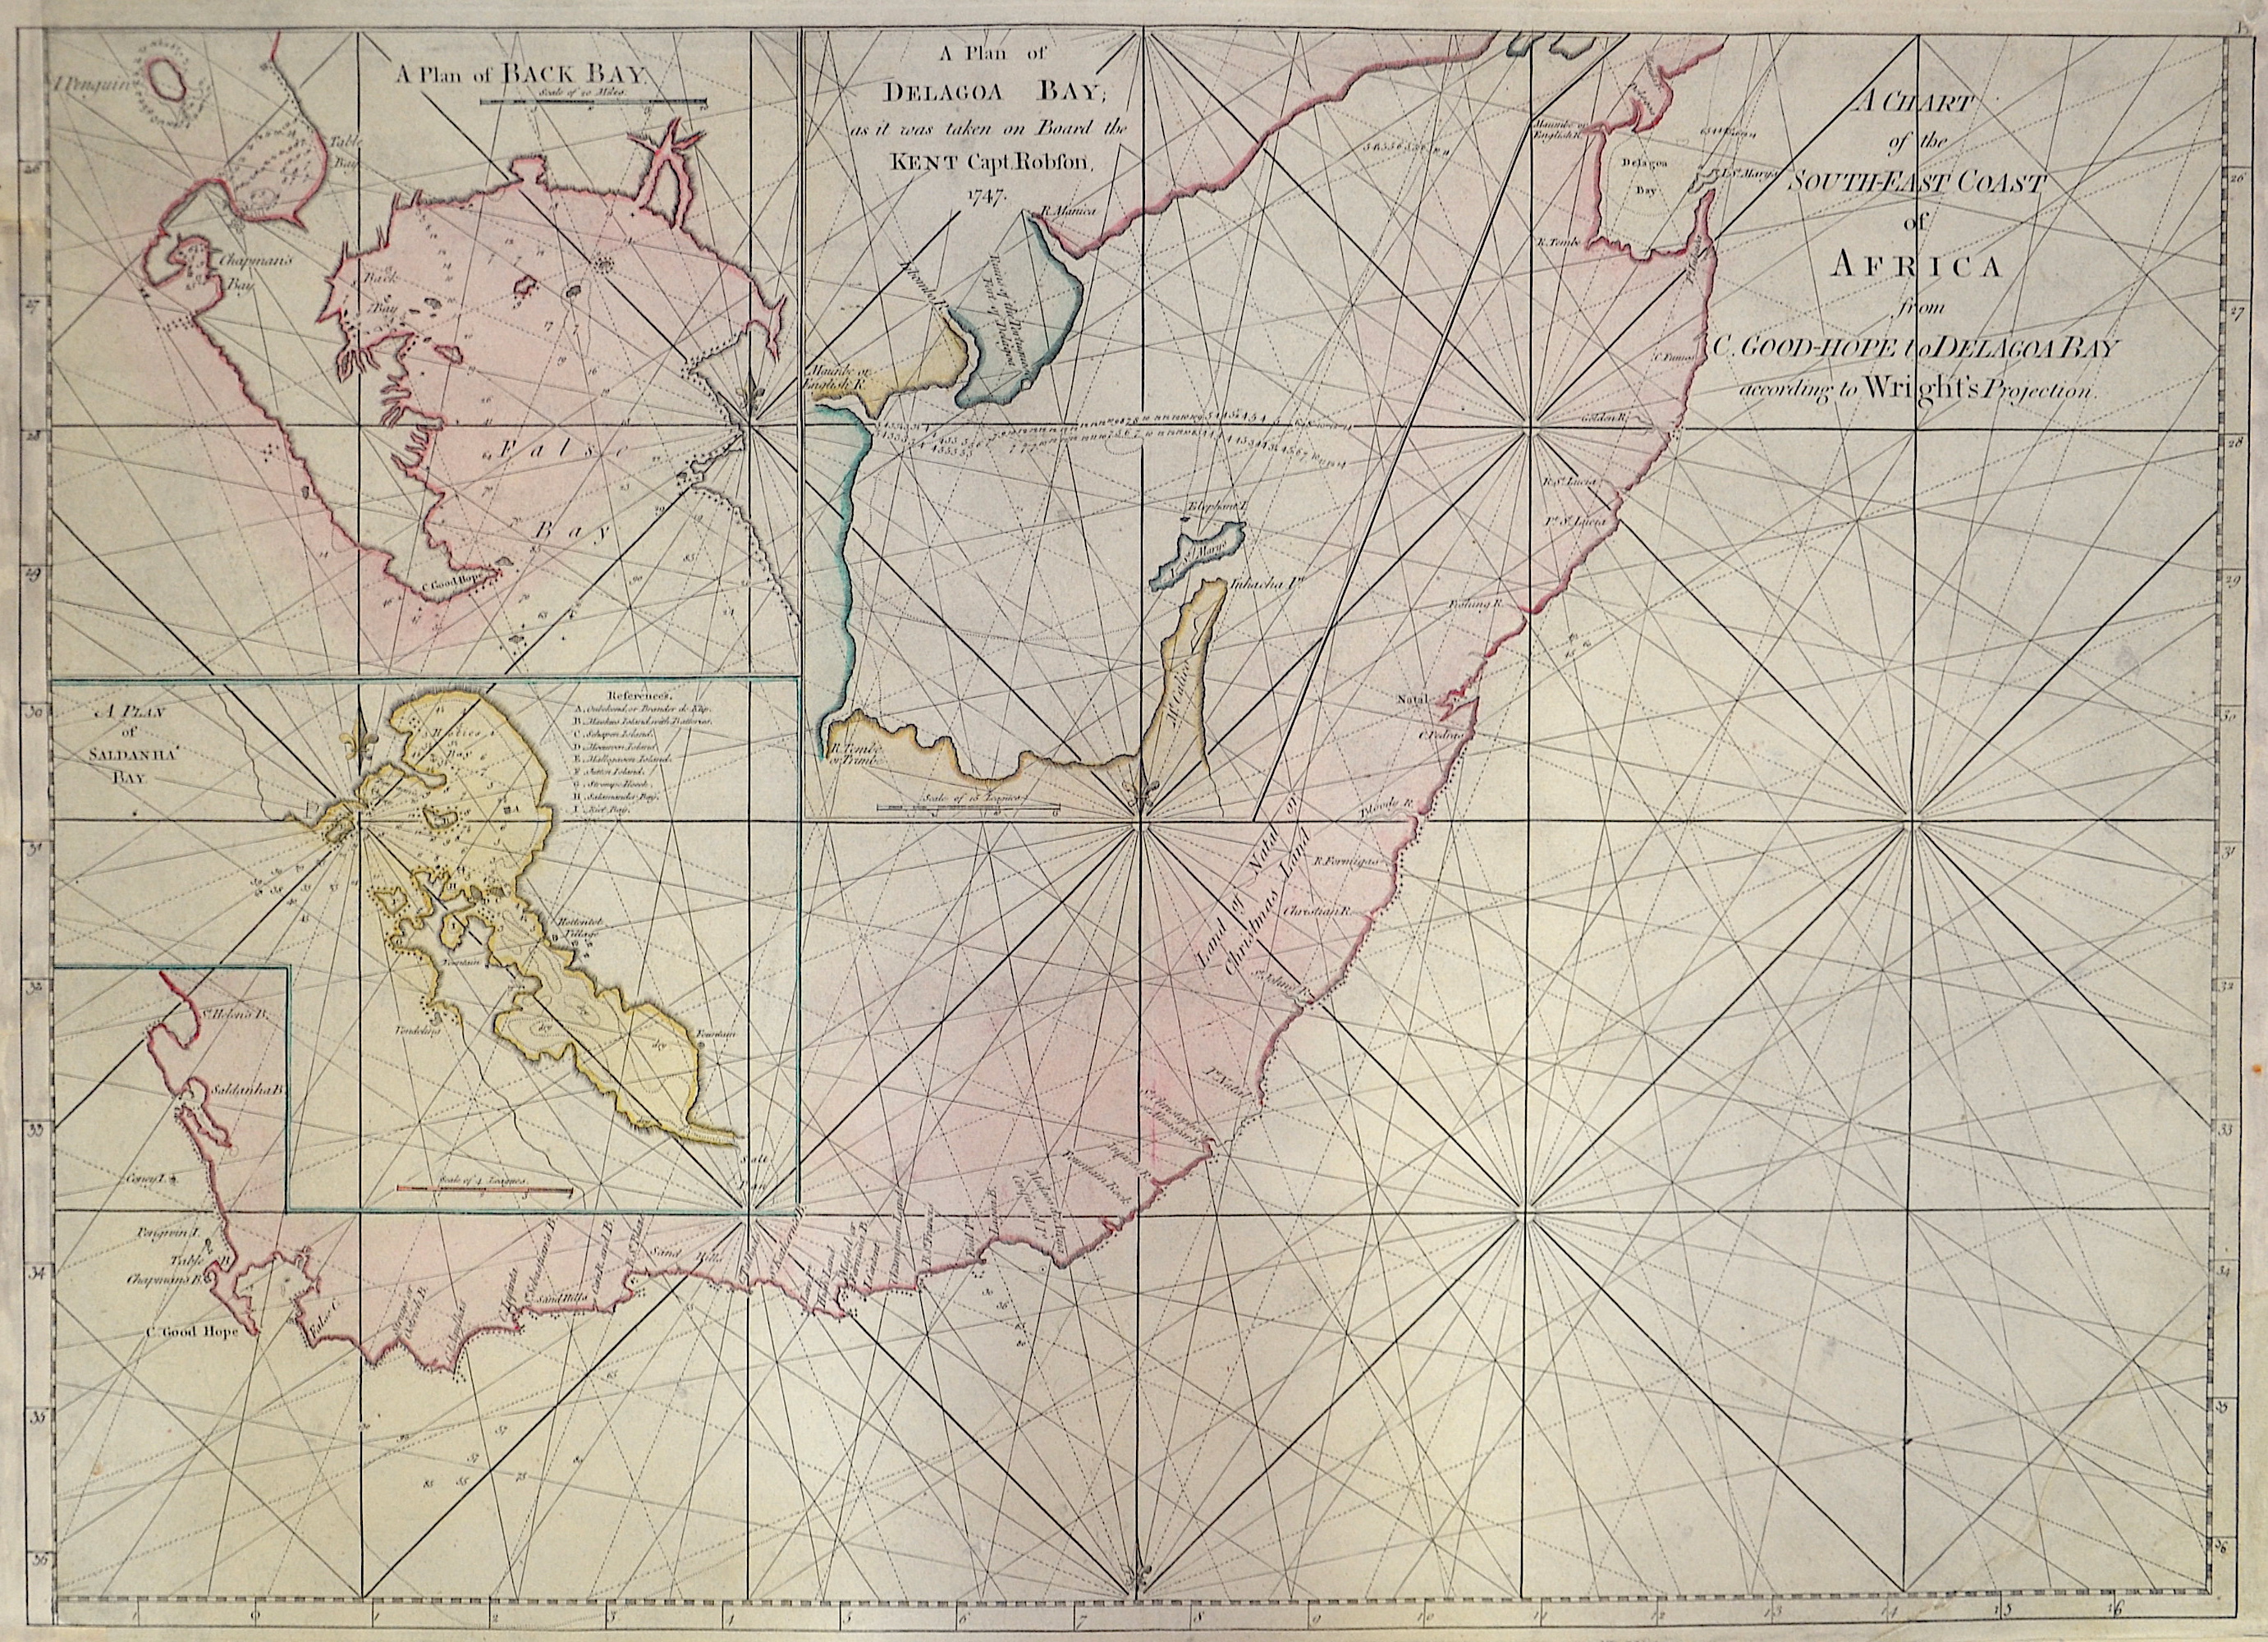 Anonymus  A Chart of the South-East Coast of Africa from C. Good-Hope to Delagoa Bay according to Wright’s Projection.